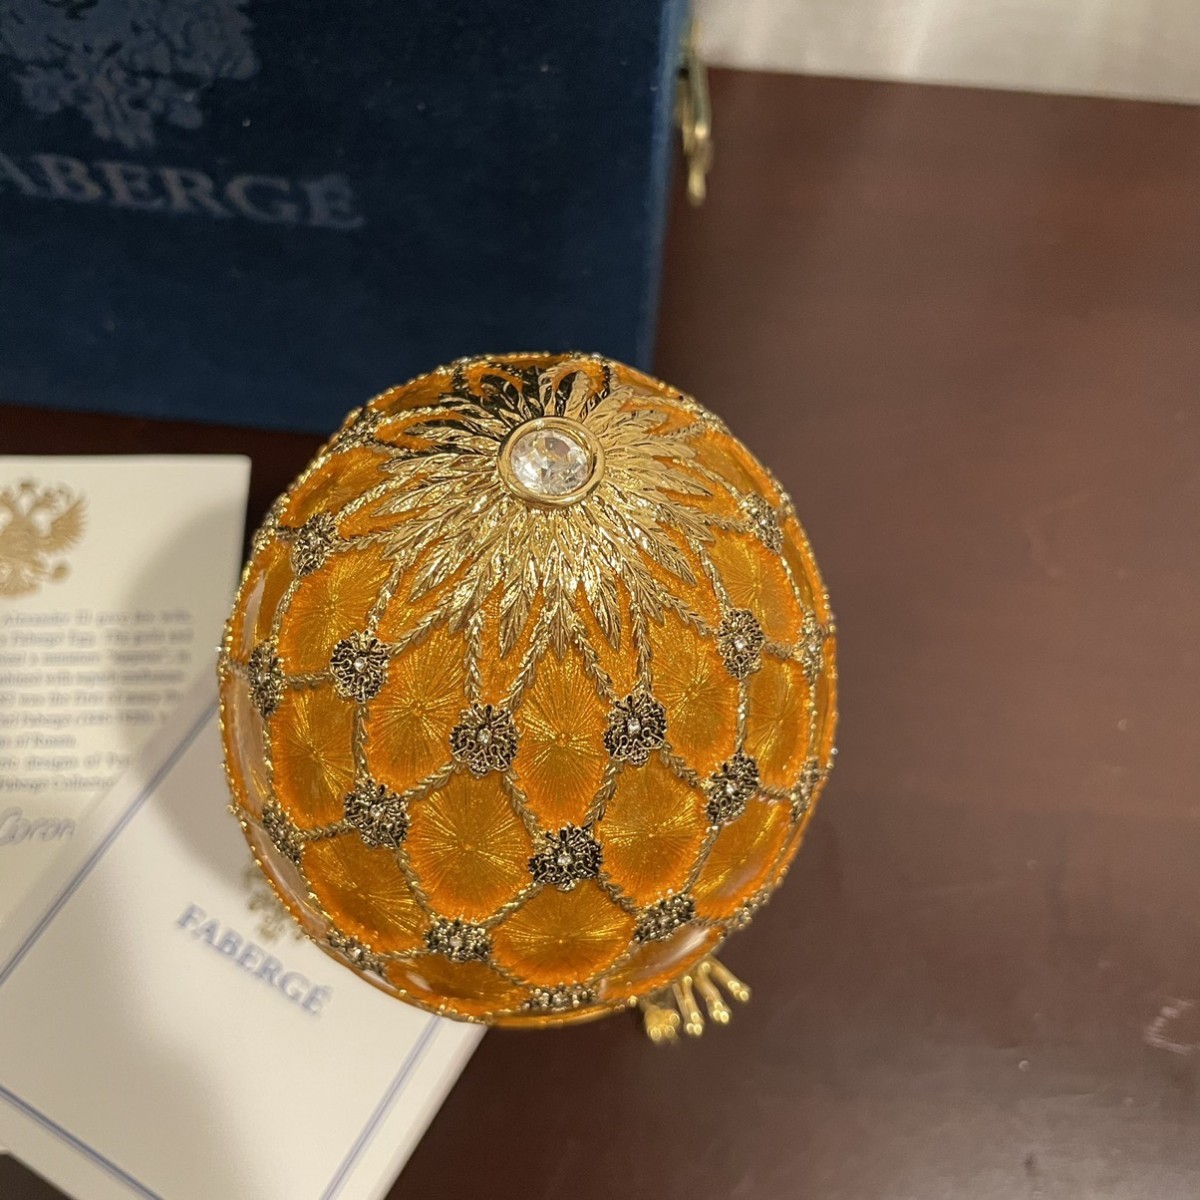 Jewelry - Faberge Imperial Coronation Egg {AUTHENTIC REPLICA} - 9